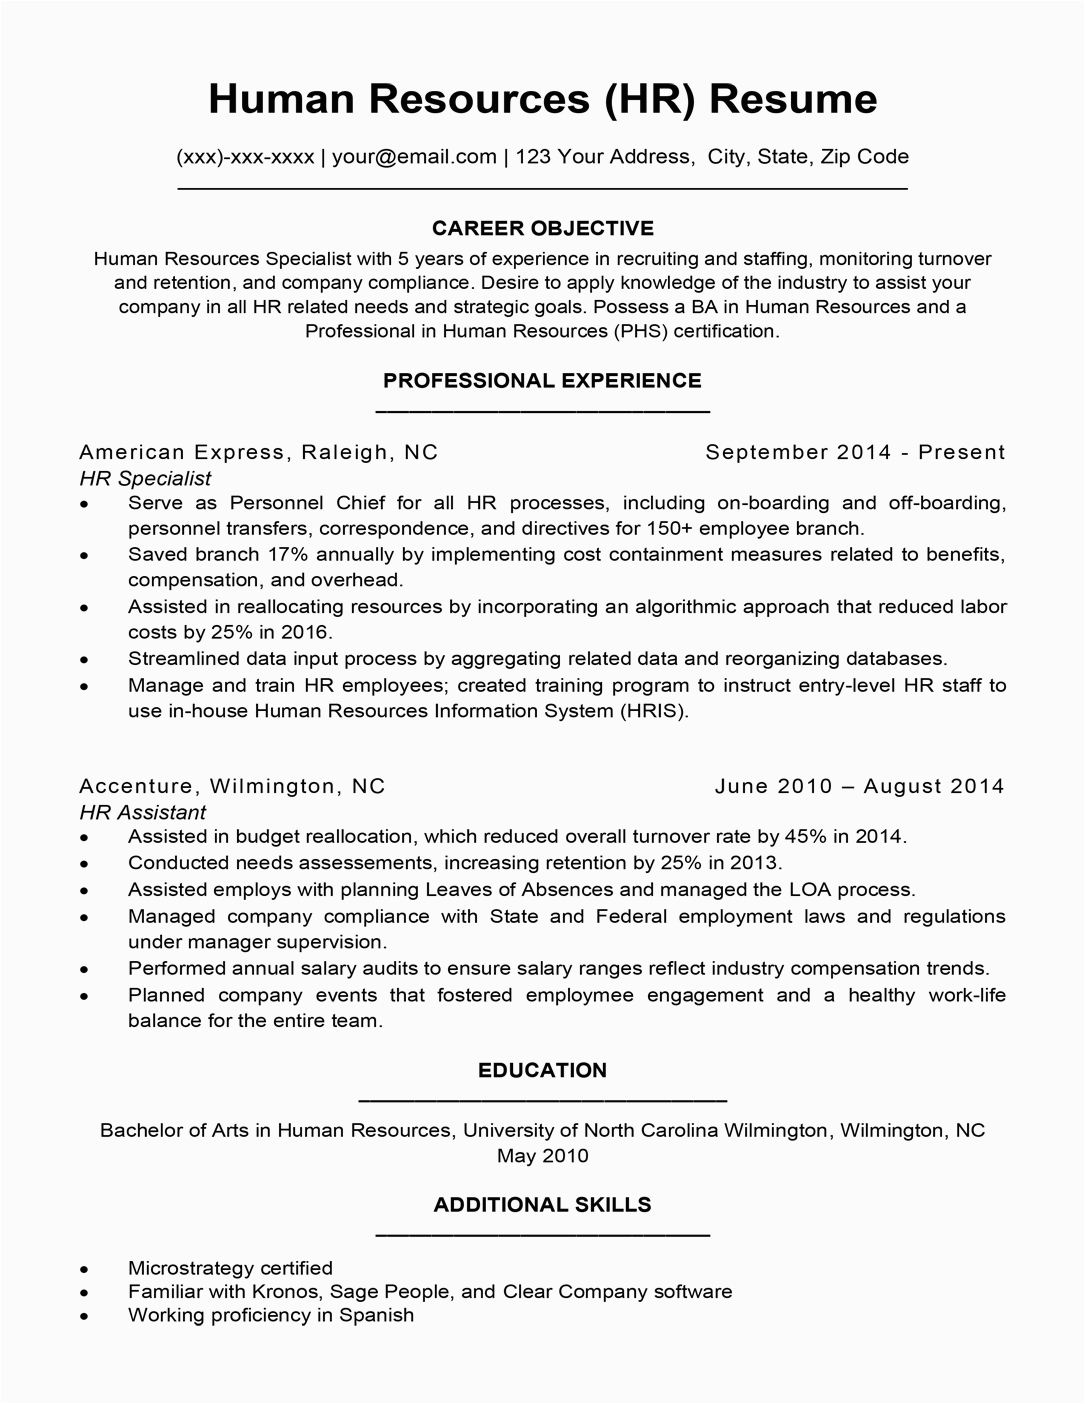 Sample Resume for Experienced Hr Manager Human Resources Resume Sample & Writing Tips